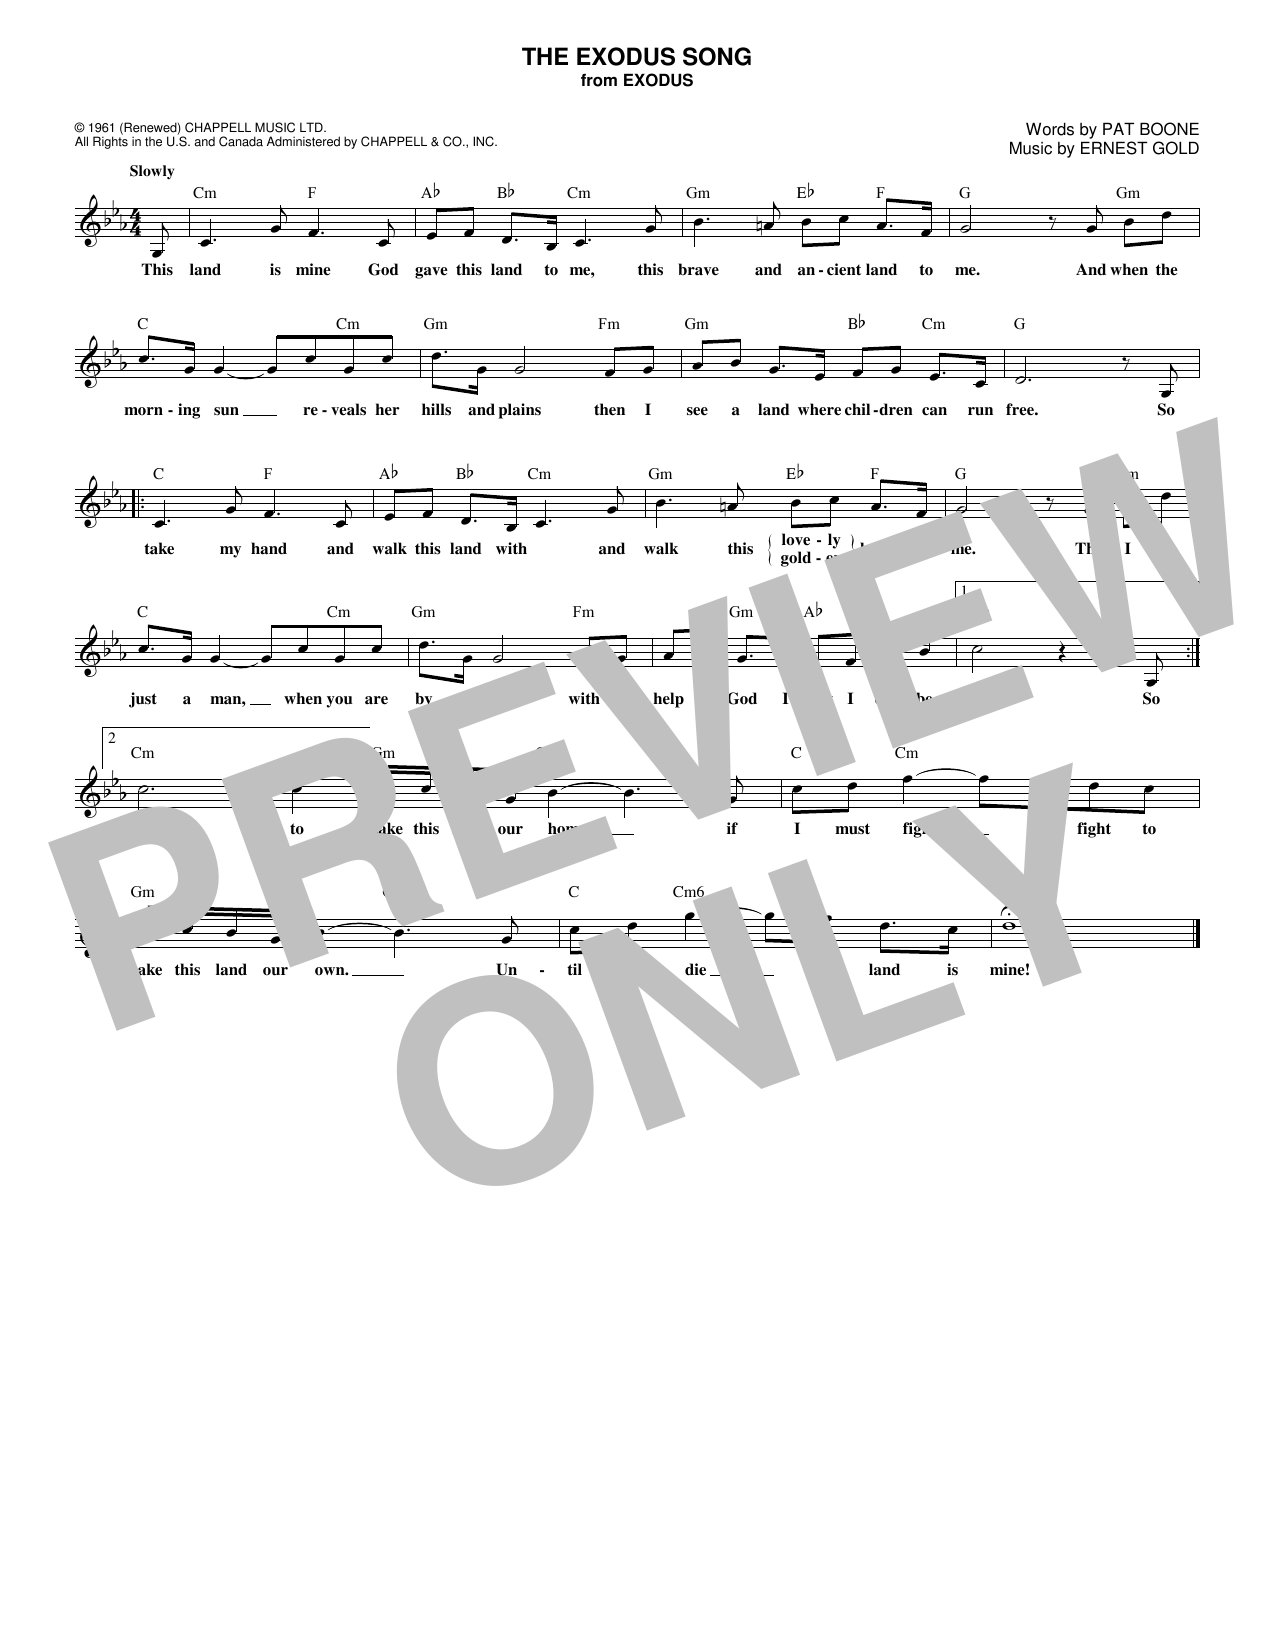 Download Pat Boone The Exodus Song Sheet Music